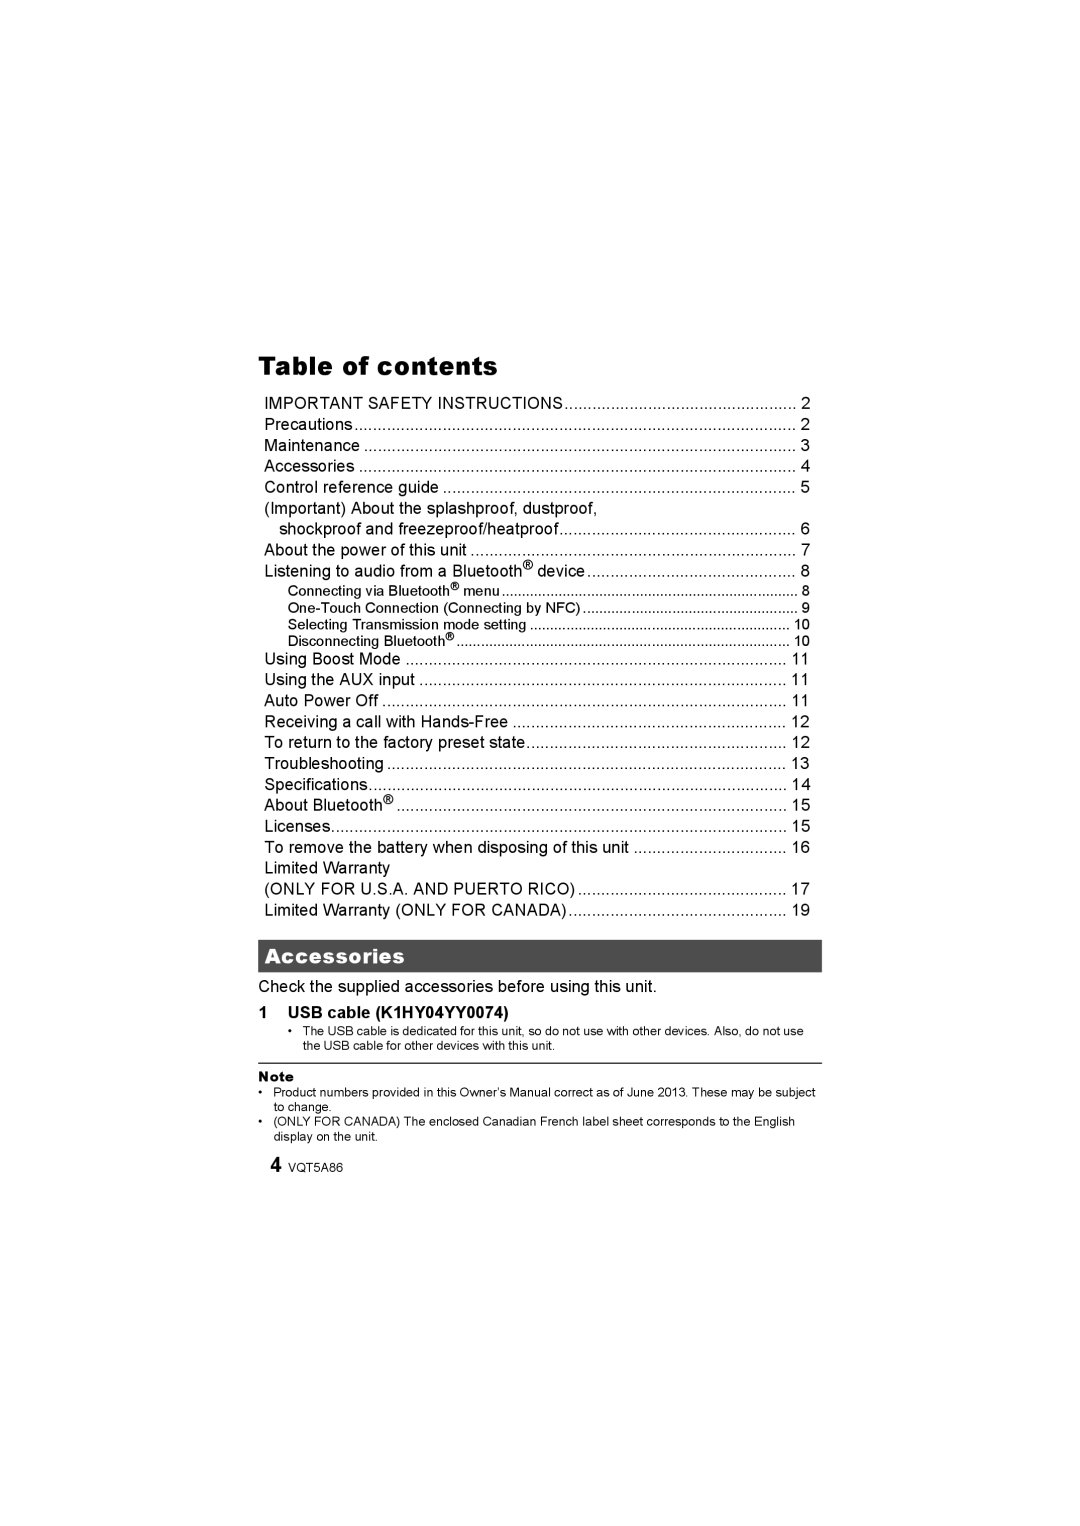 Panasonic SC-NT10 owner manual Accessories, 1USB cable K1HY04YY0074, Table of contents 